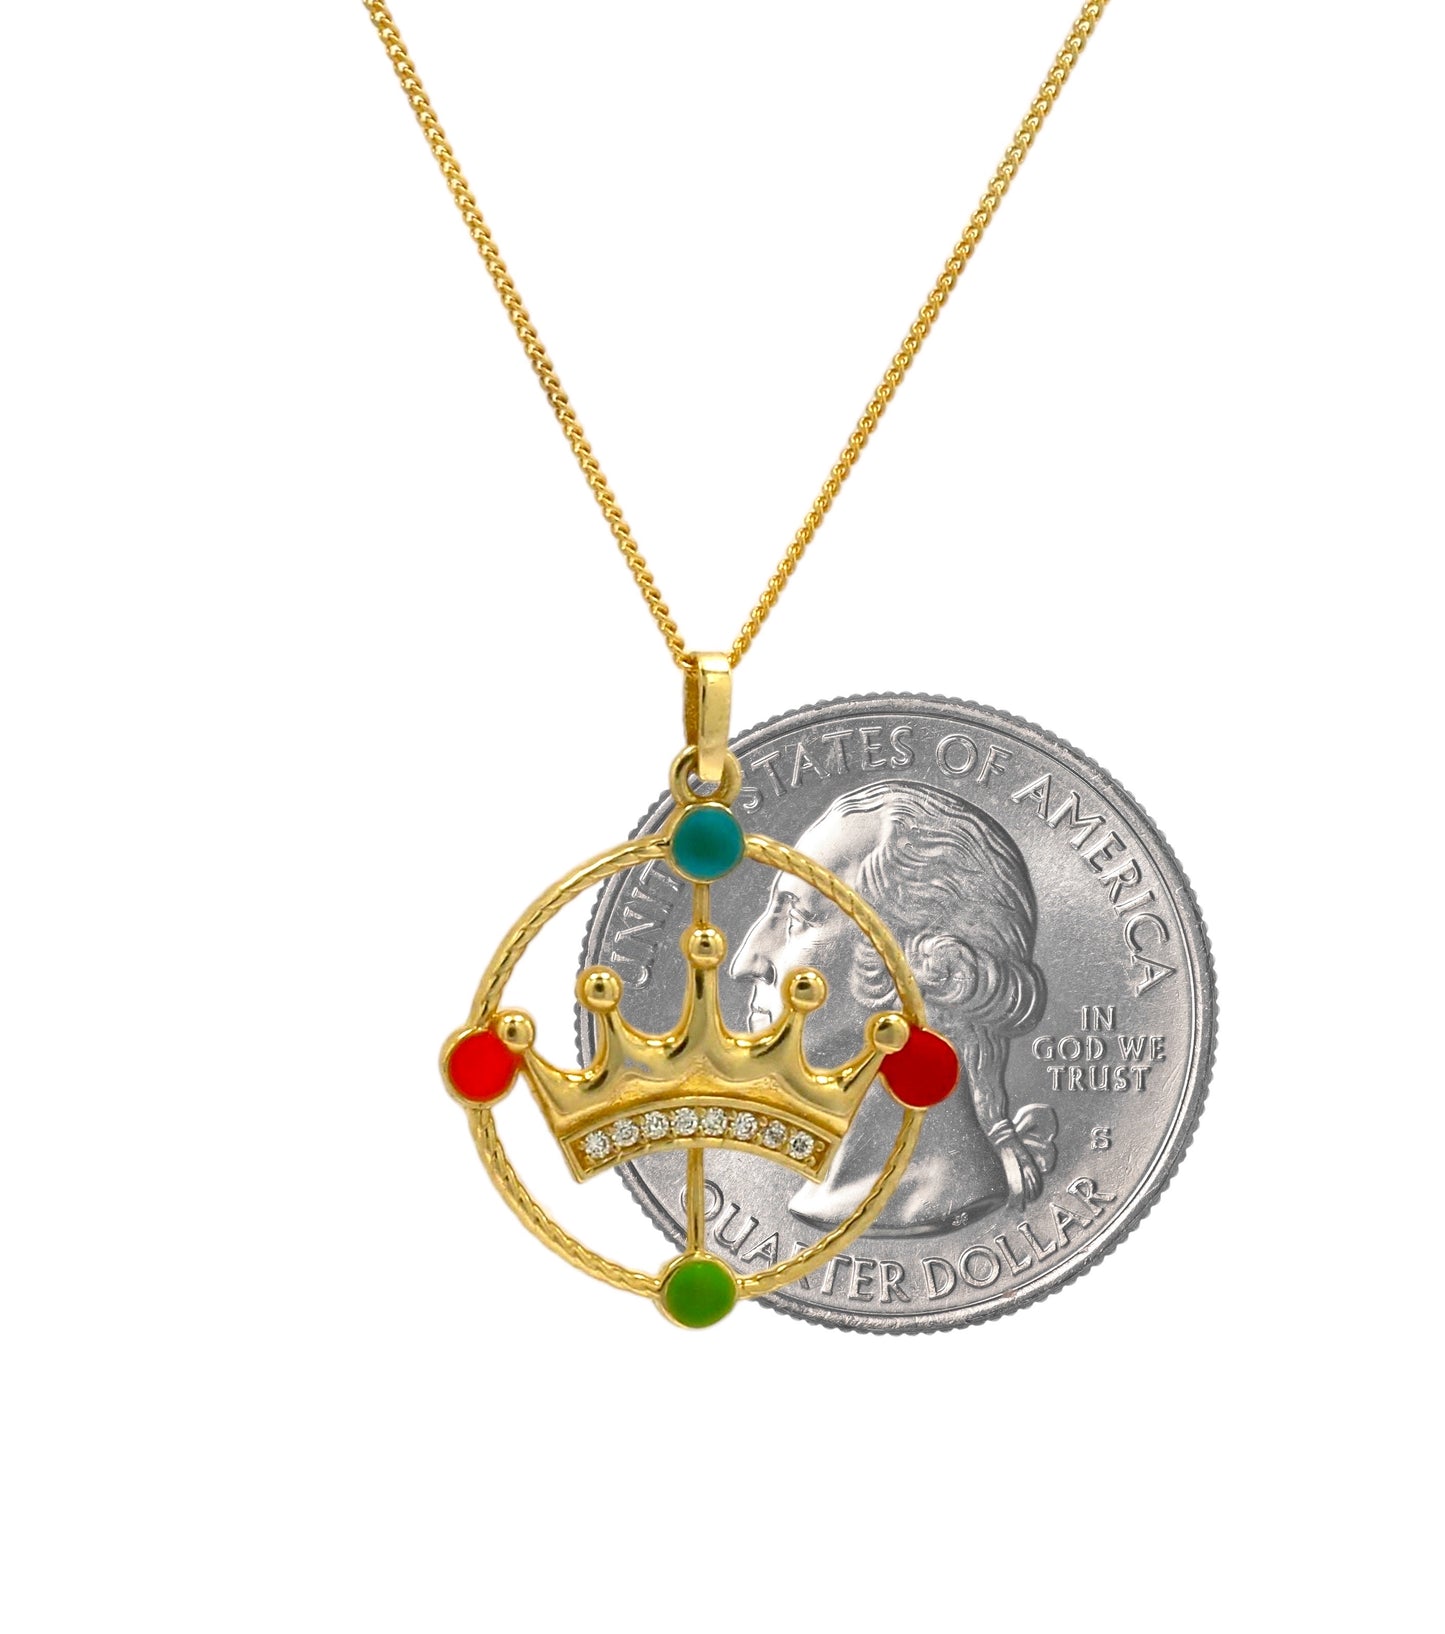 10k Yellow gold crown pendant necklace-01